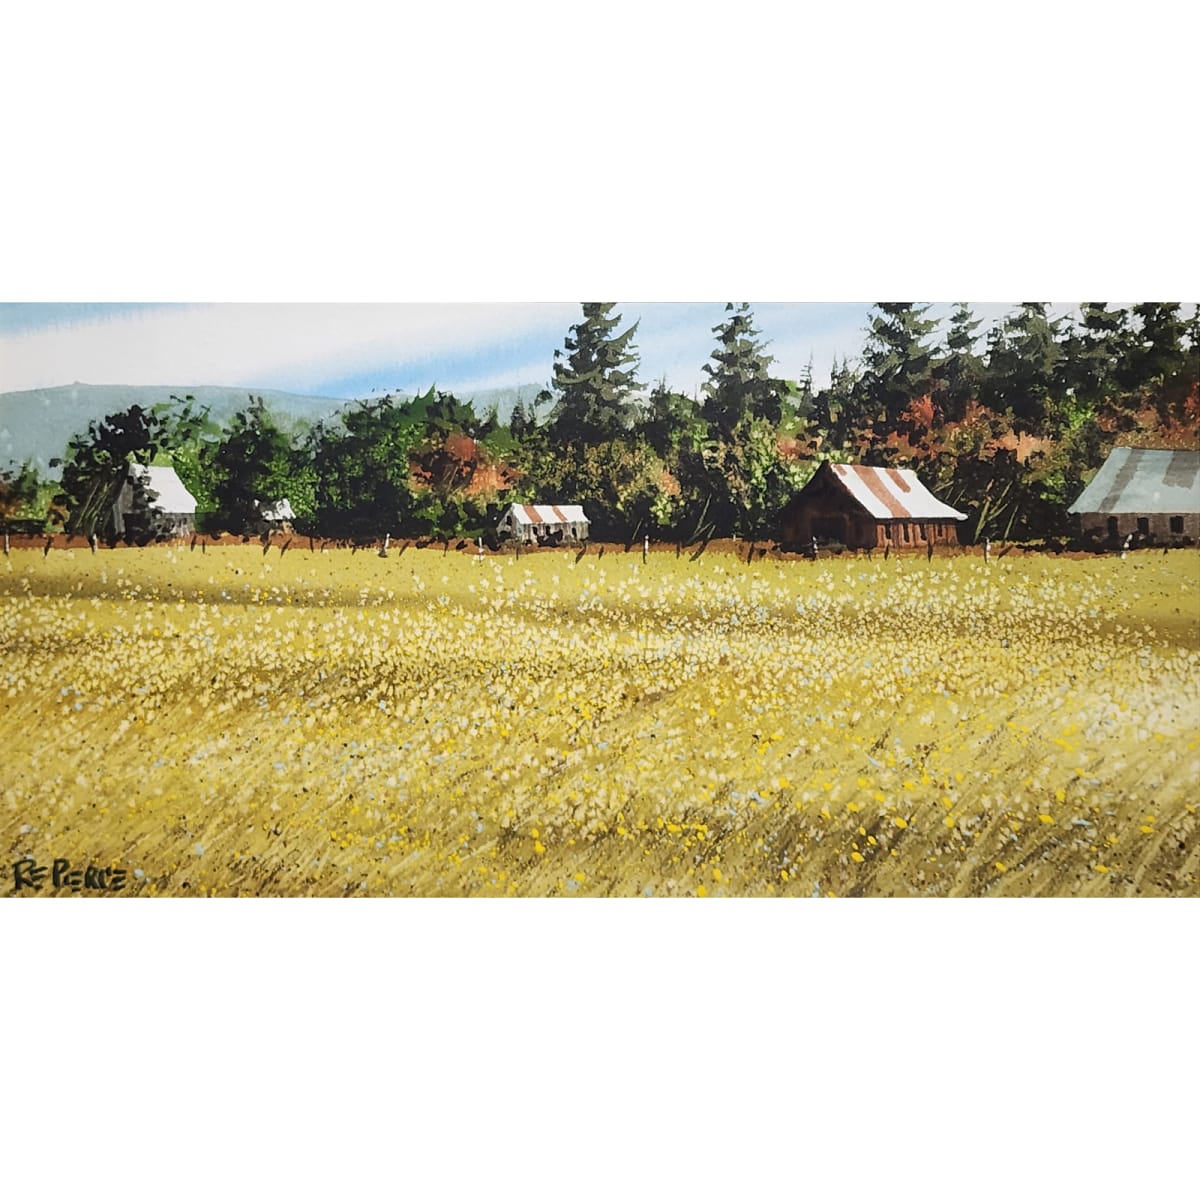 UNTITLED [ LANDSCAPE: HAY FIELD WITH BARNS ] by ROBERT E. PIERCE 